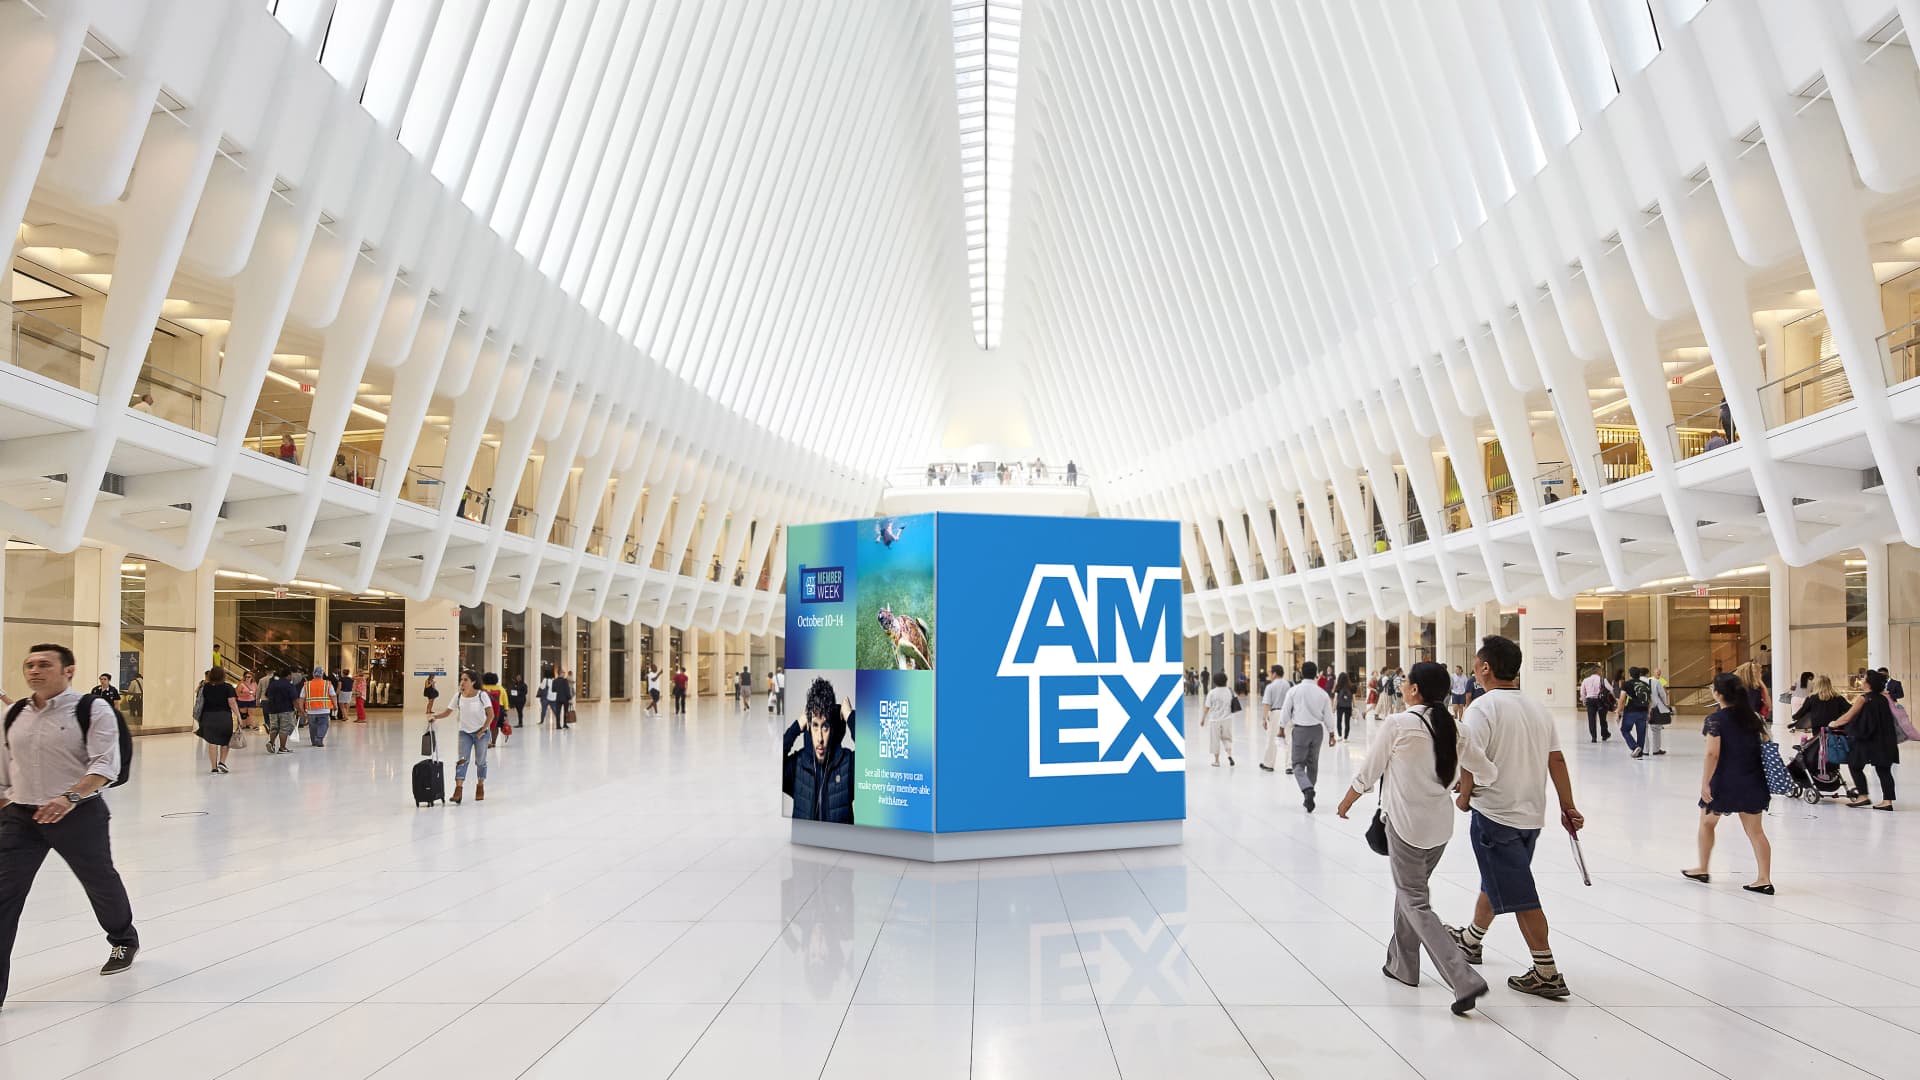 American Express offering up to $300 in credits to cardmembers for dining, travel and shopping purchases during 'Member Week'